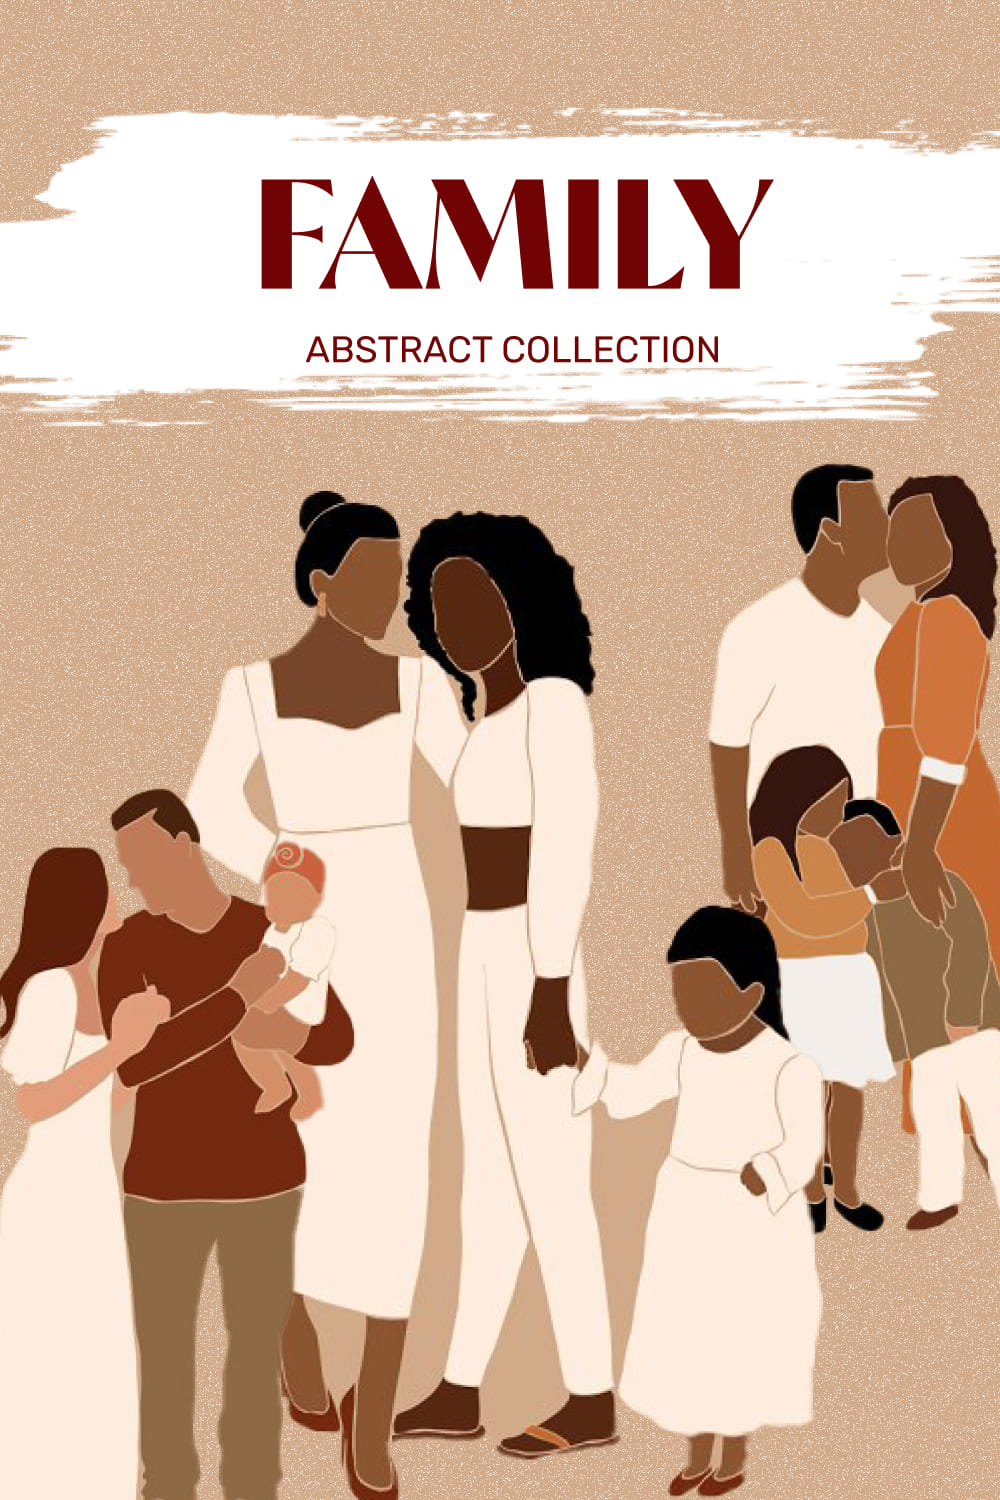 Abstract Family Collection - Pinterest.